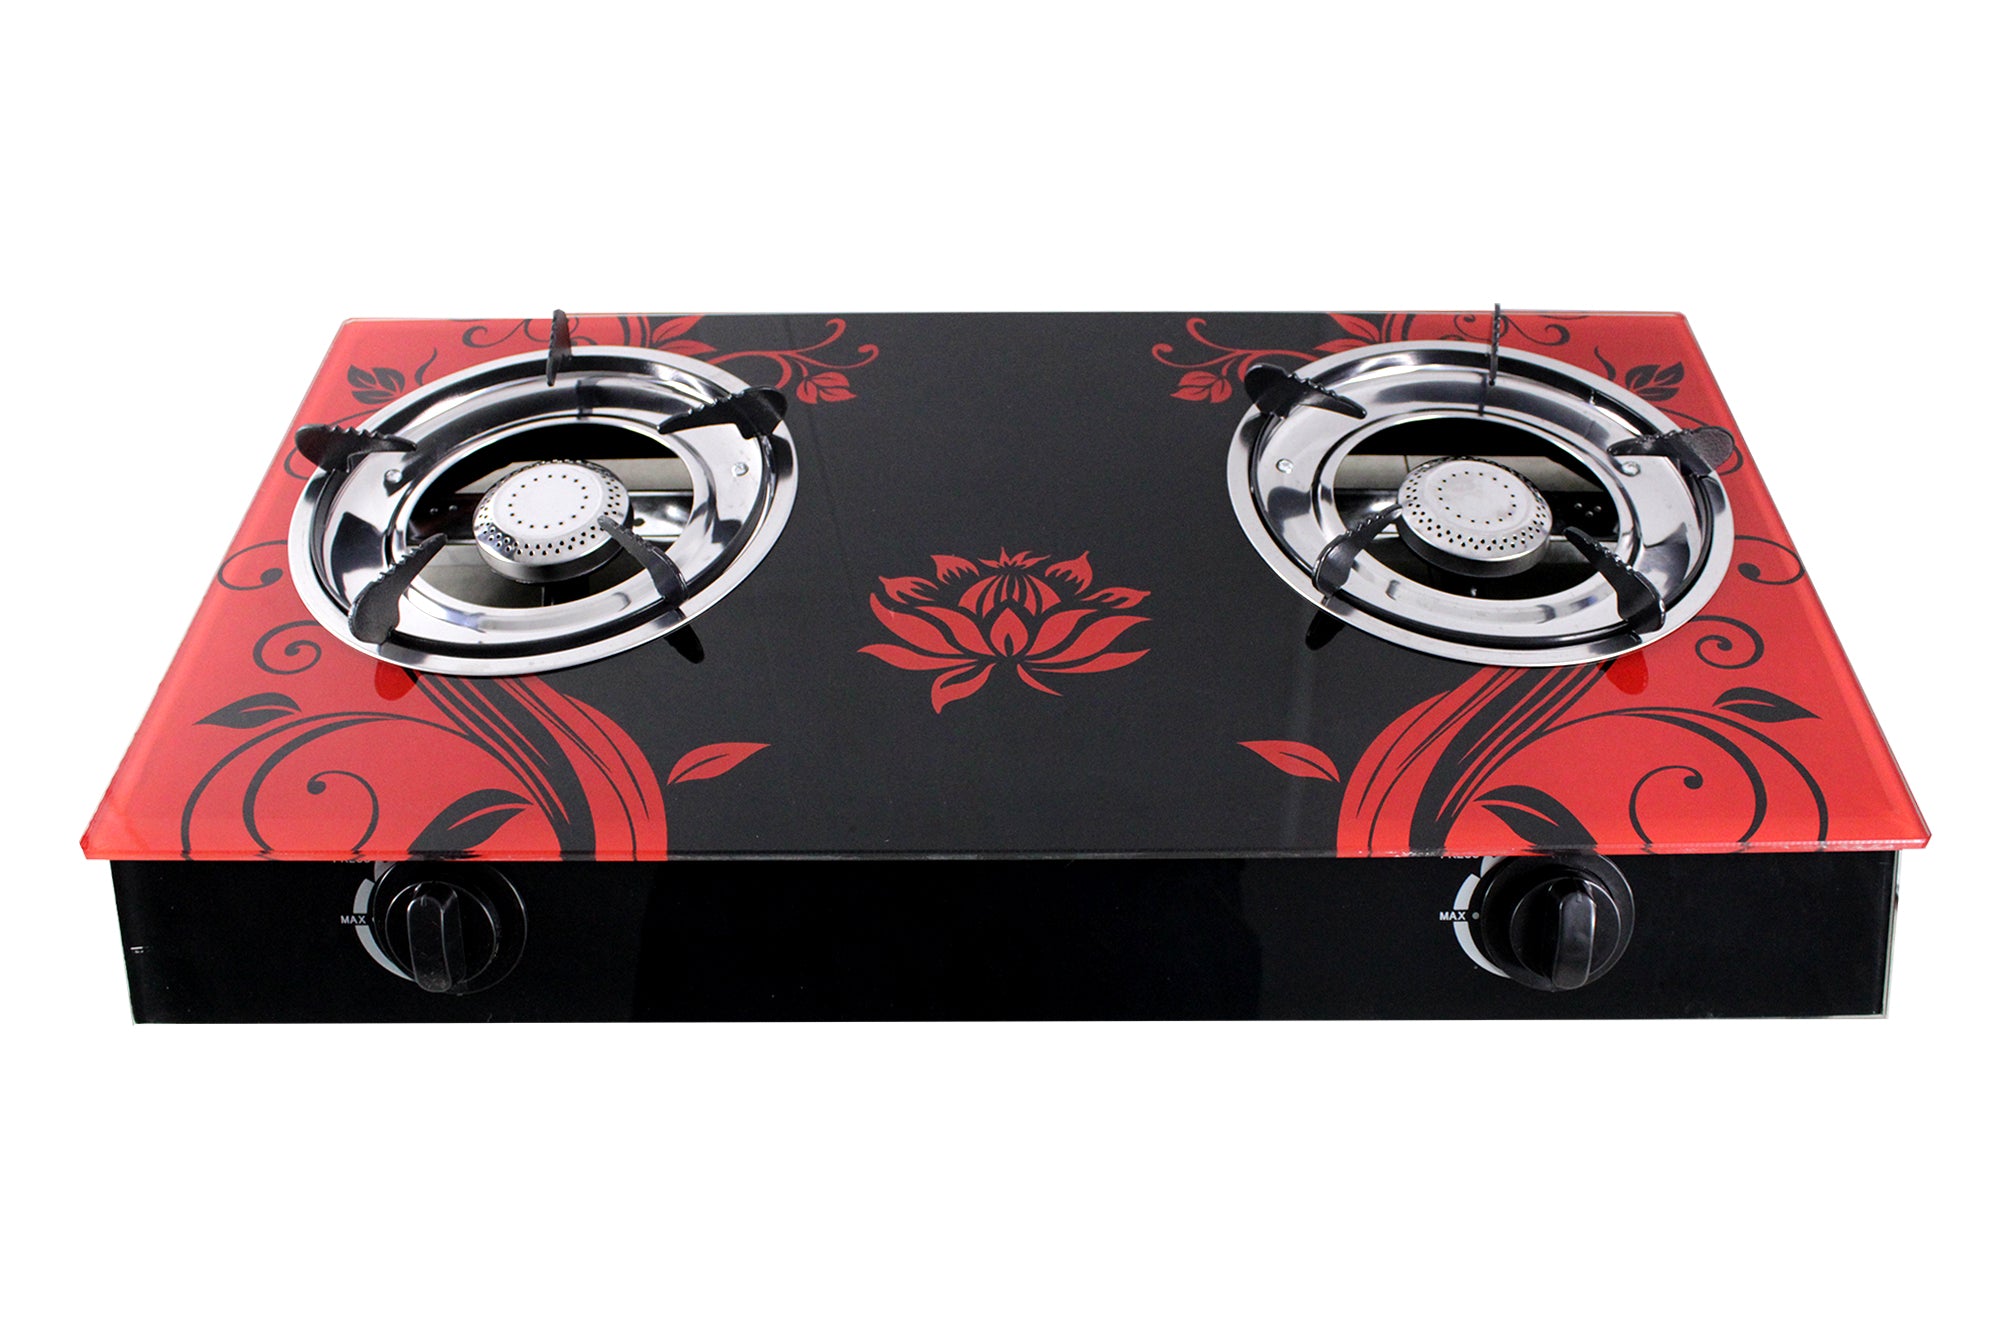 Two-Burner Auto-Ignition Tempered Glass Panel Gas Stove - Red Petal